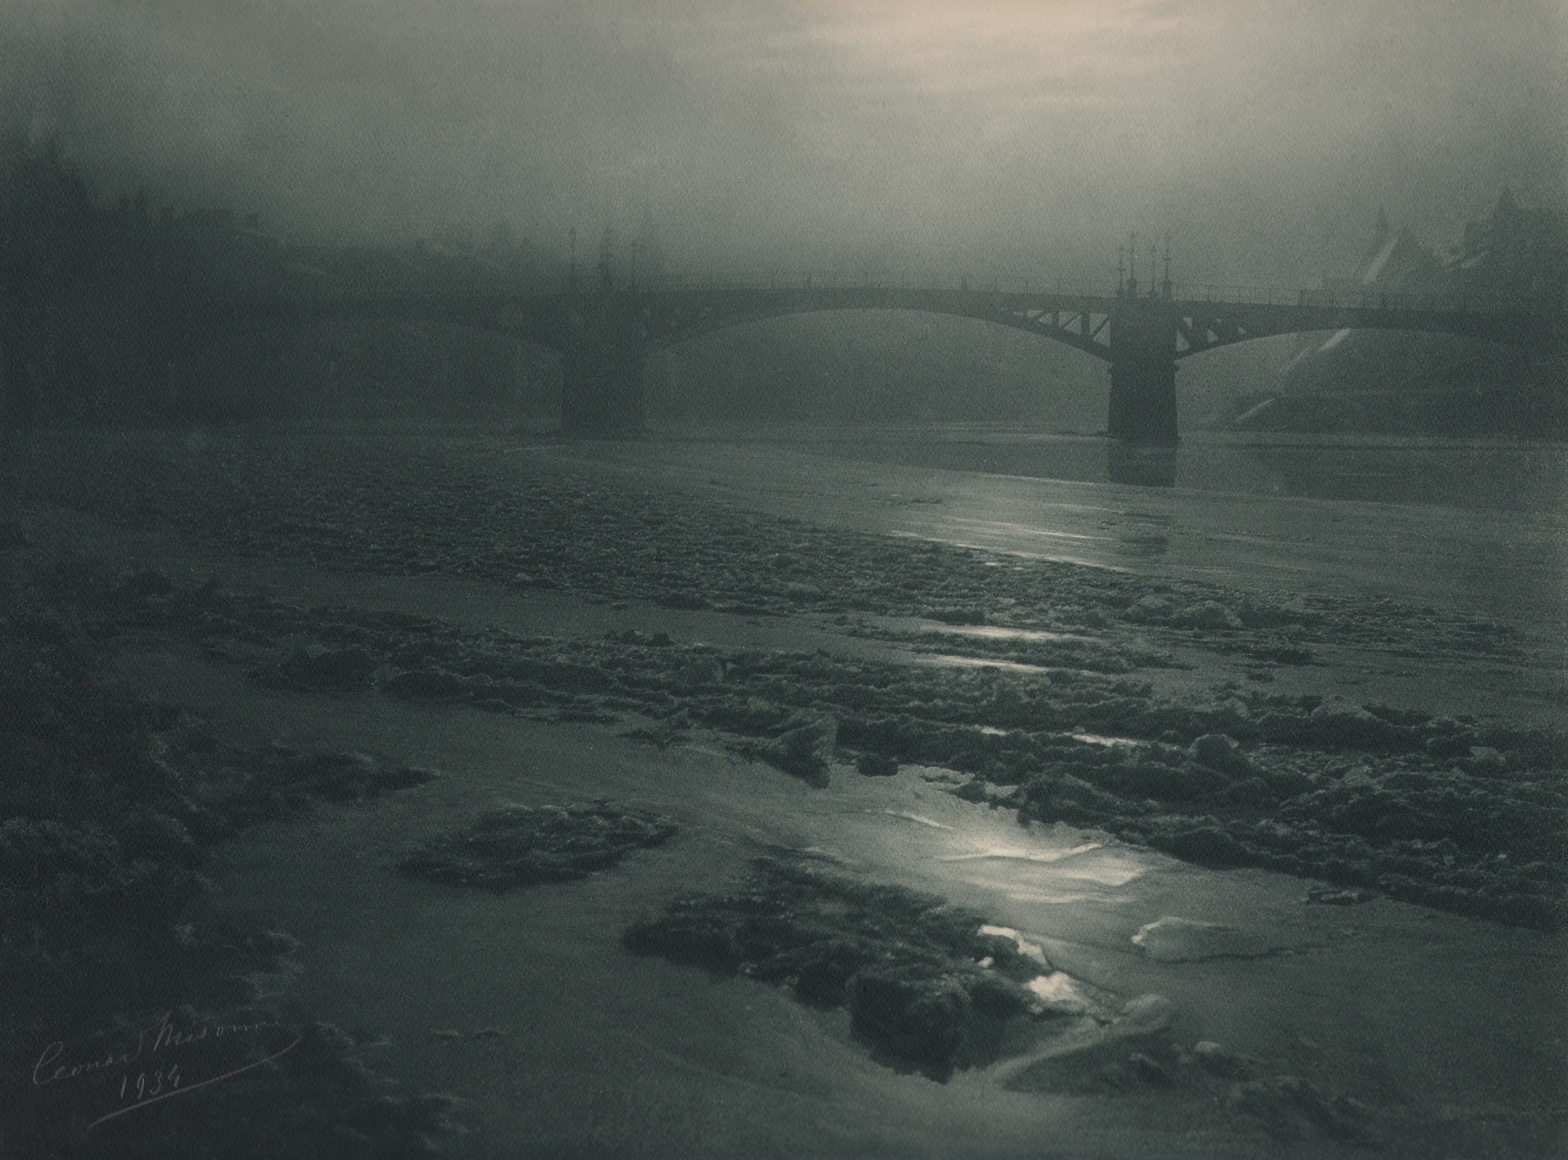 12. L&eacute;onard Misonne, Hiver &agrave; Dinant, 1934. Partially frozen body of water running under a bridge in hazy light. Gray/green-toned print.